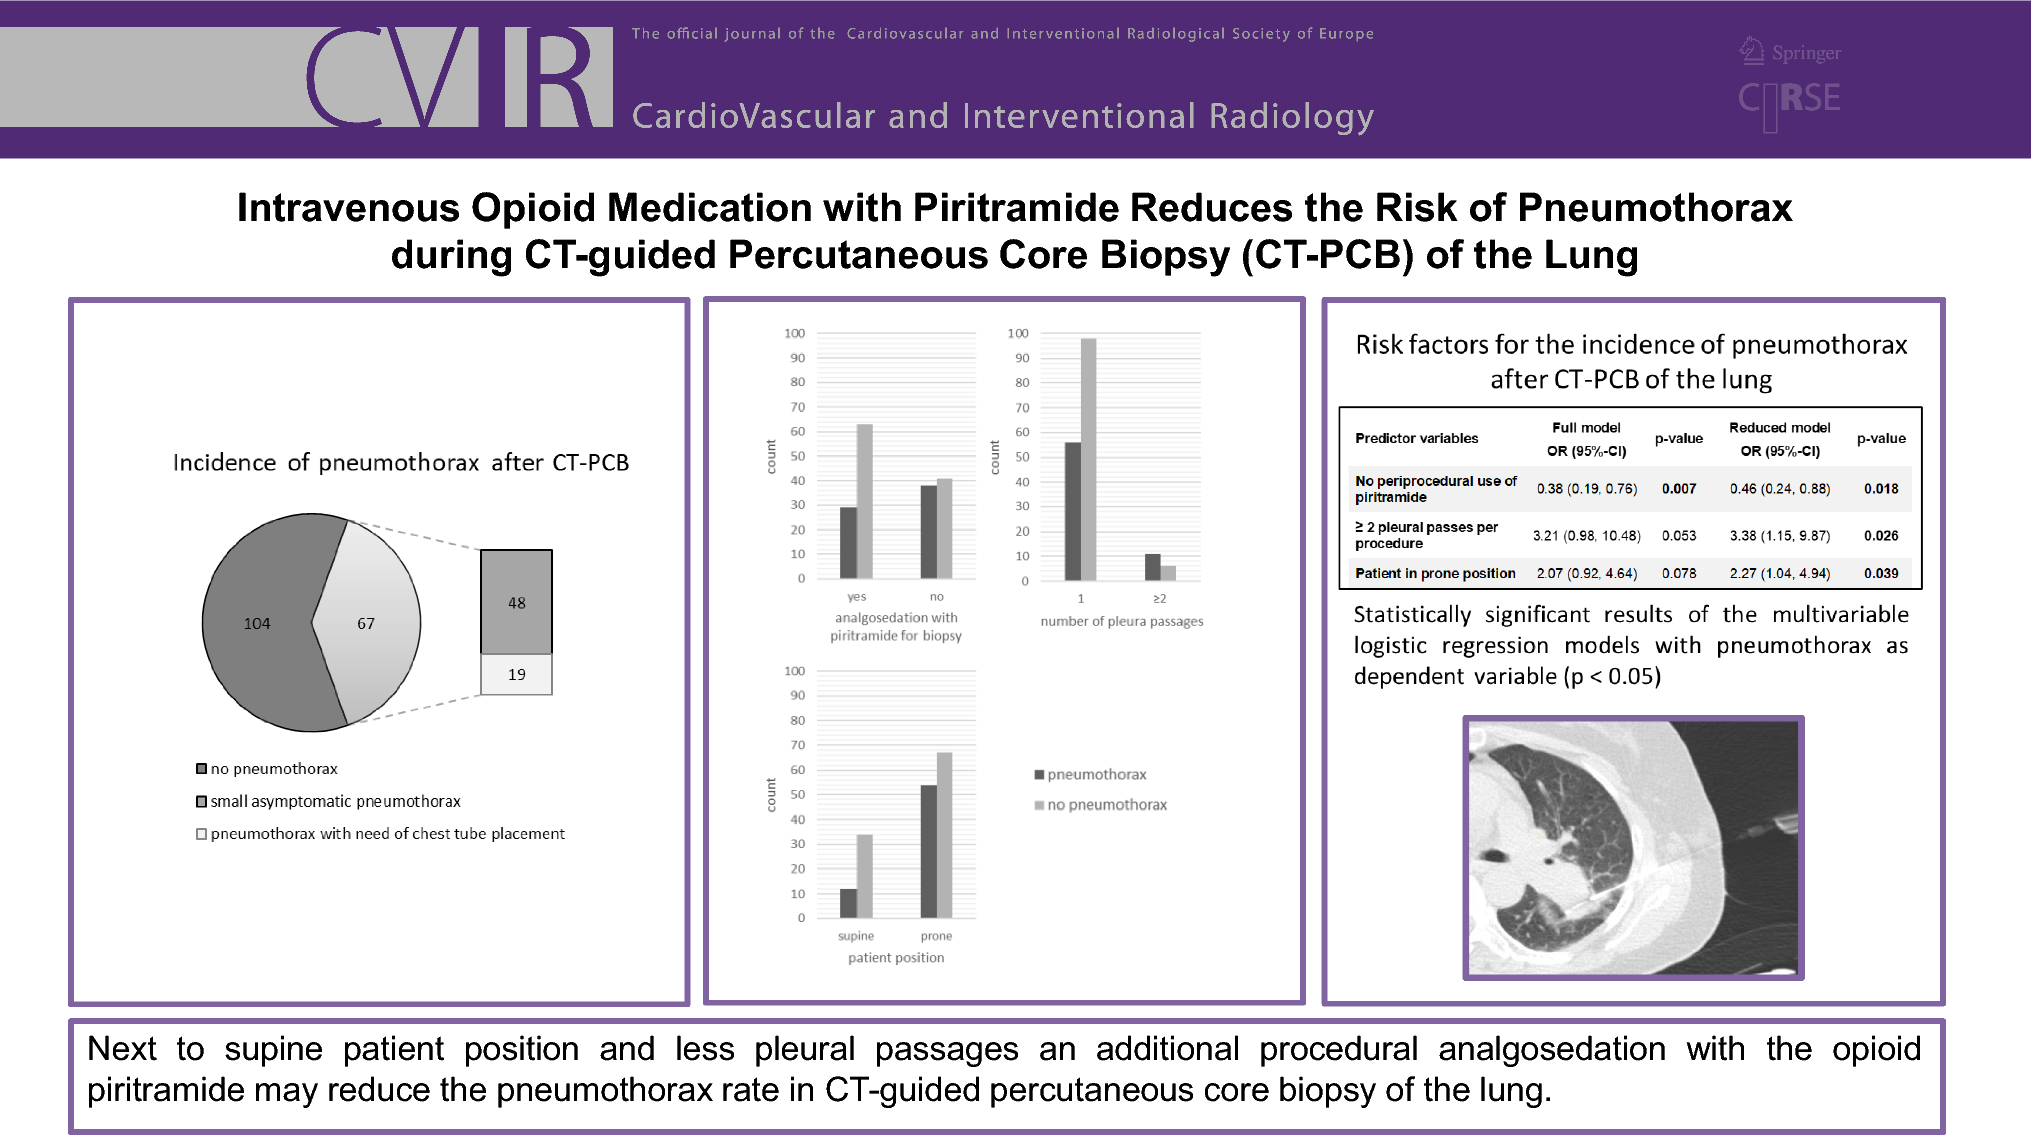 Intravenous Opioid Medication with Piritramide Reduces the Risk of Pneumothorax During CT-Guided Percutaneous Core Biopsy of the Lung